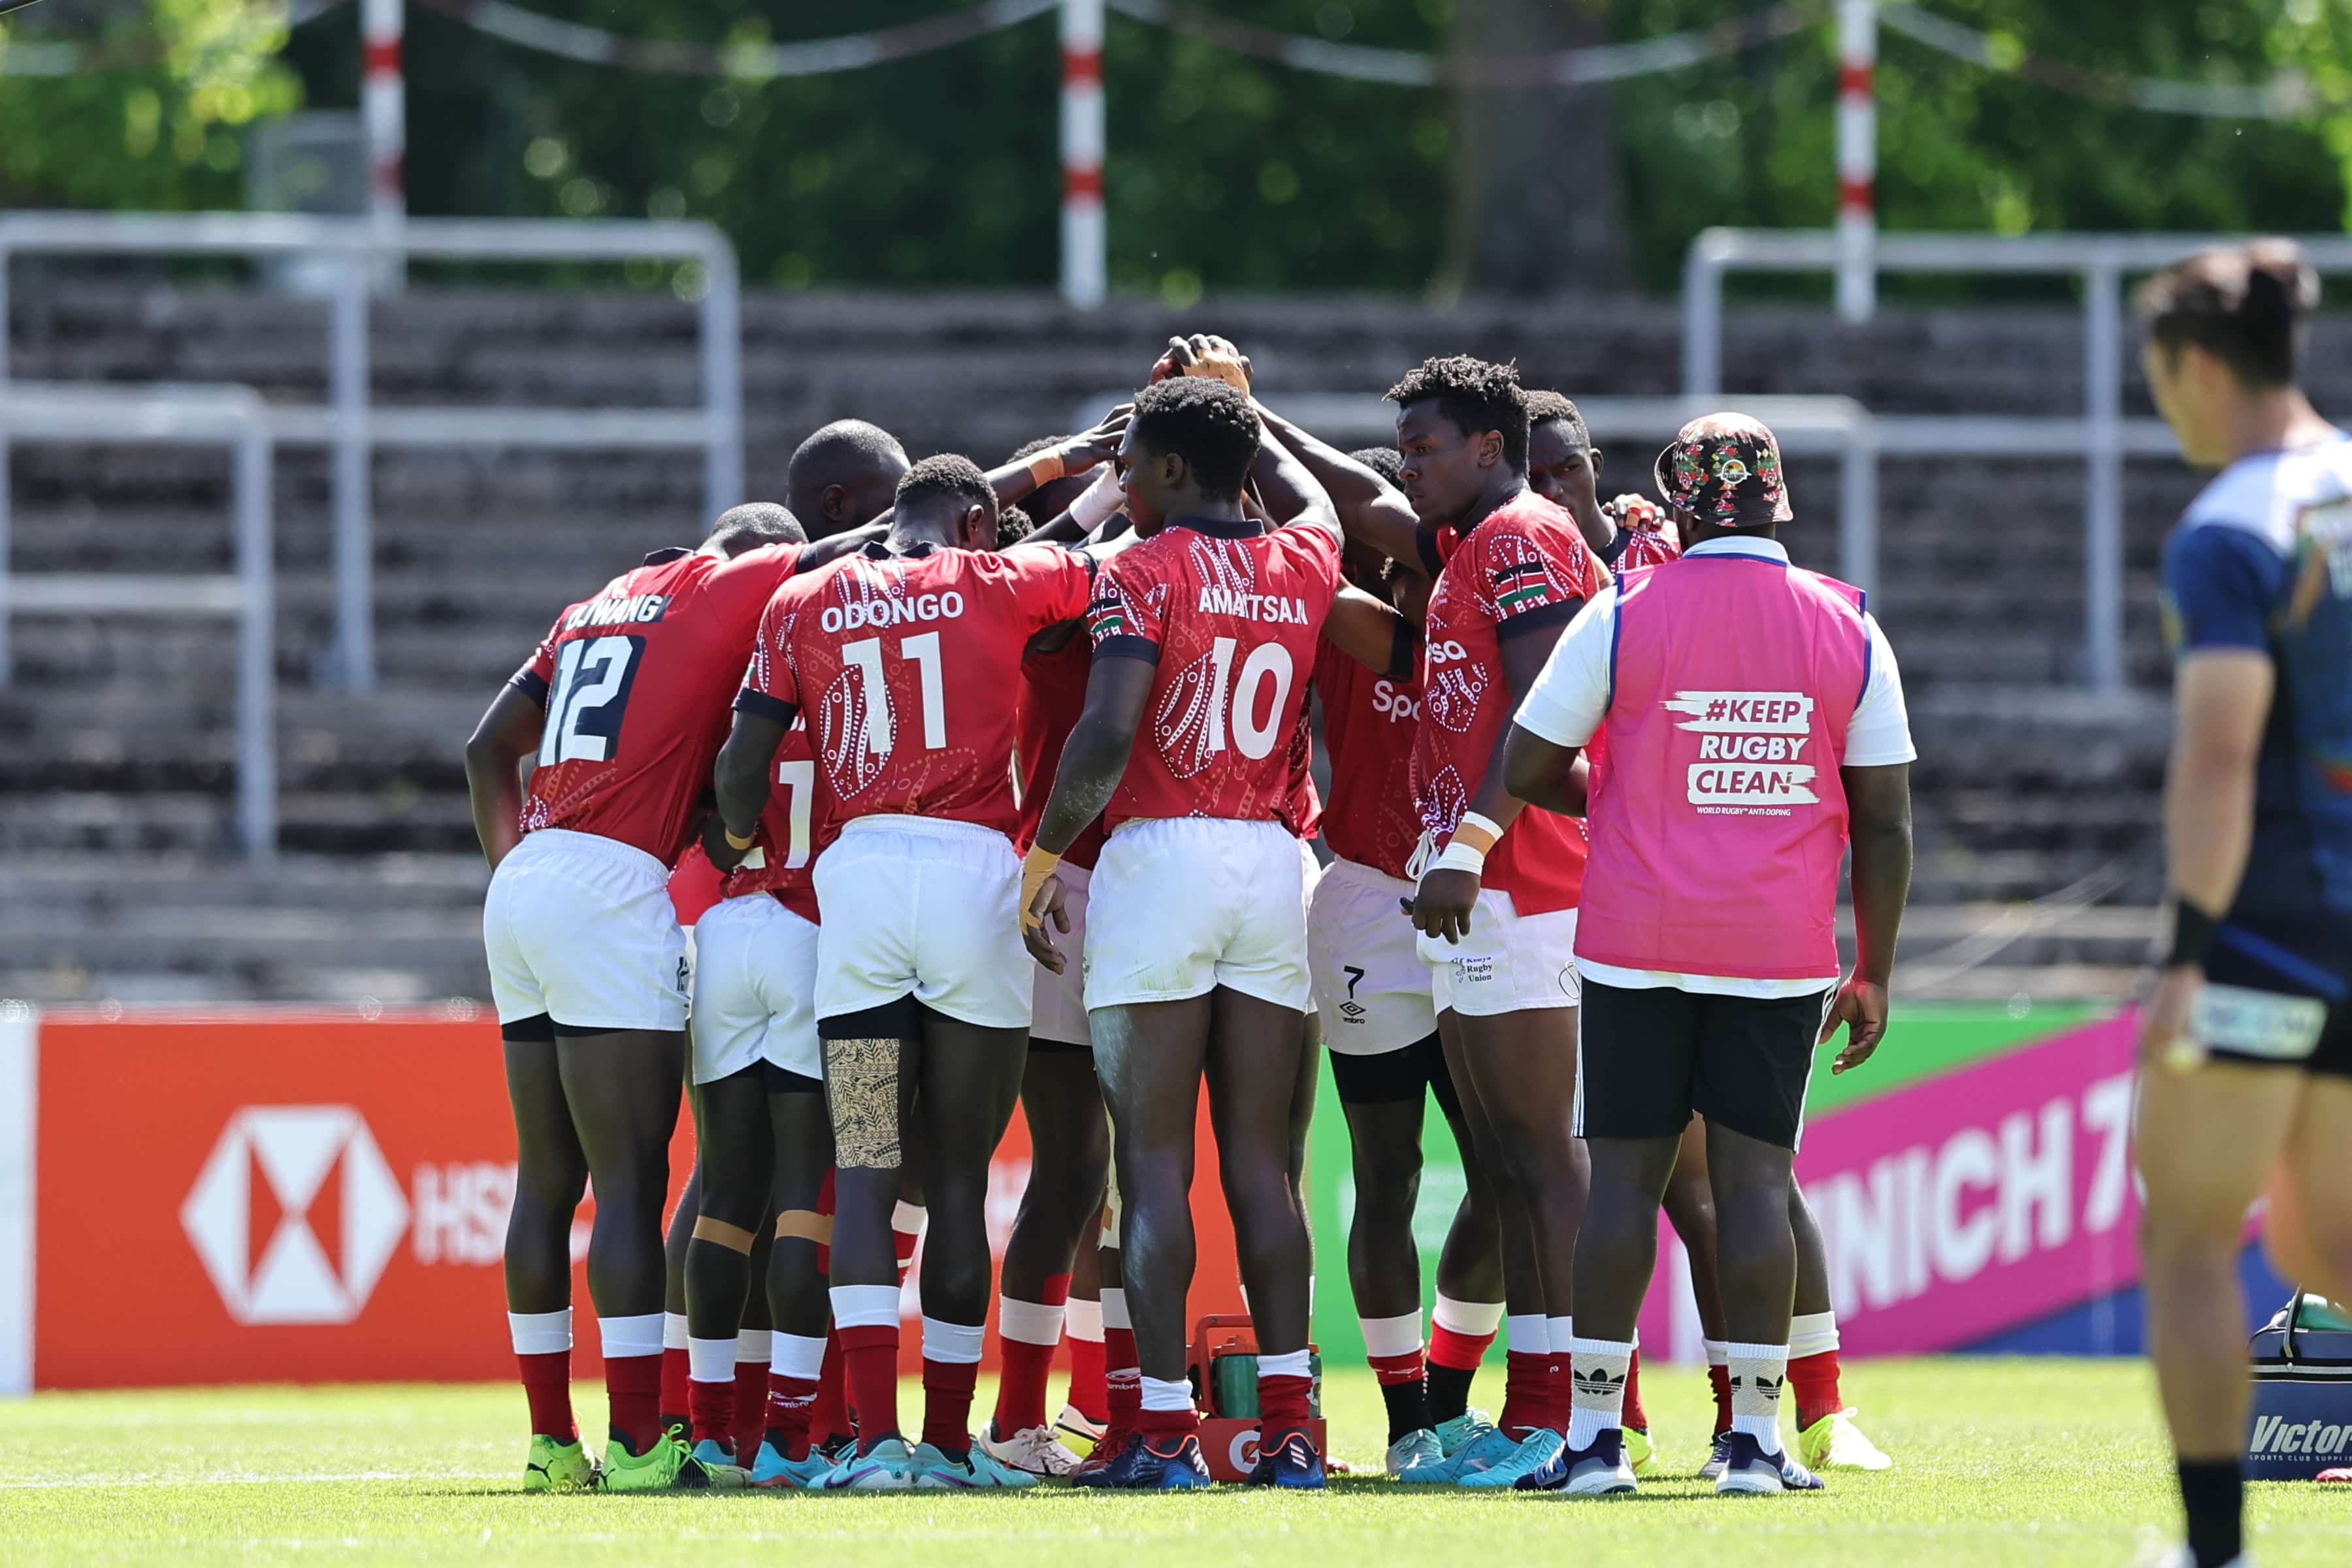 HSBC Playoffs: Shujaa's campaign off to a perfect start after dispatching Samoa